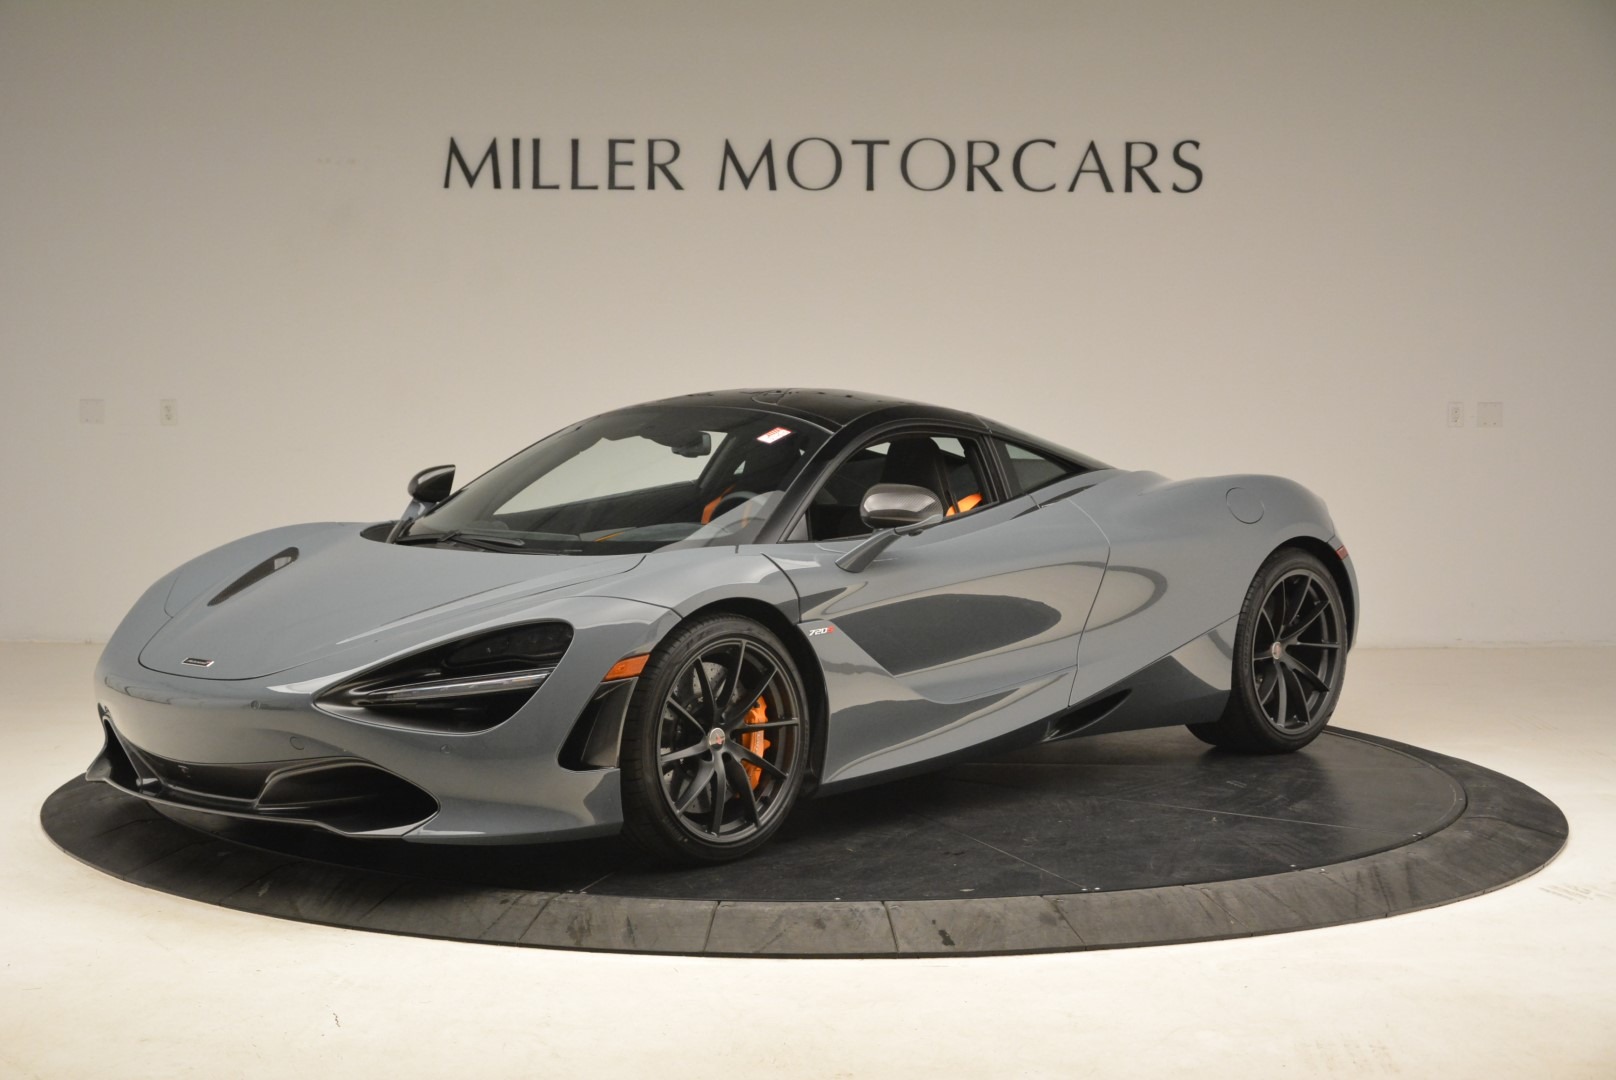 Used 2018 McLaren 720S Coupe for sale Sold at McLaren Greenwich in Greenwich CT 06830 1